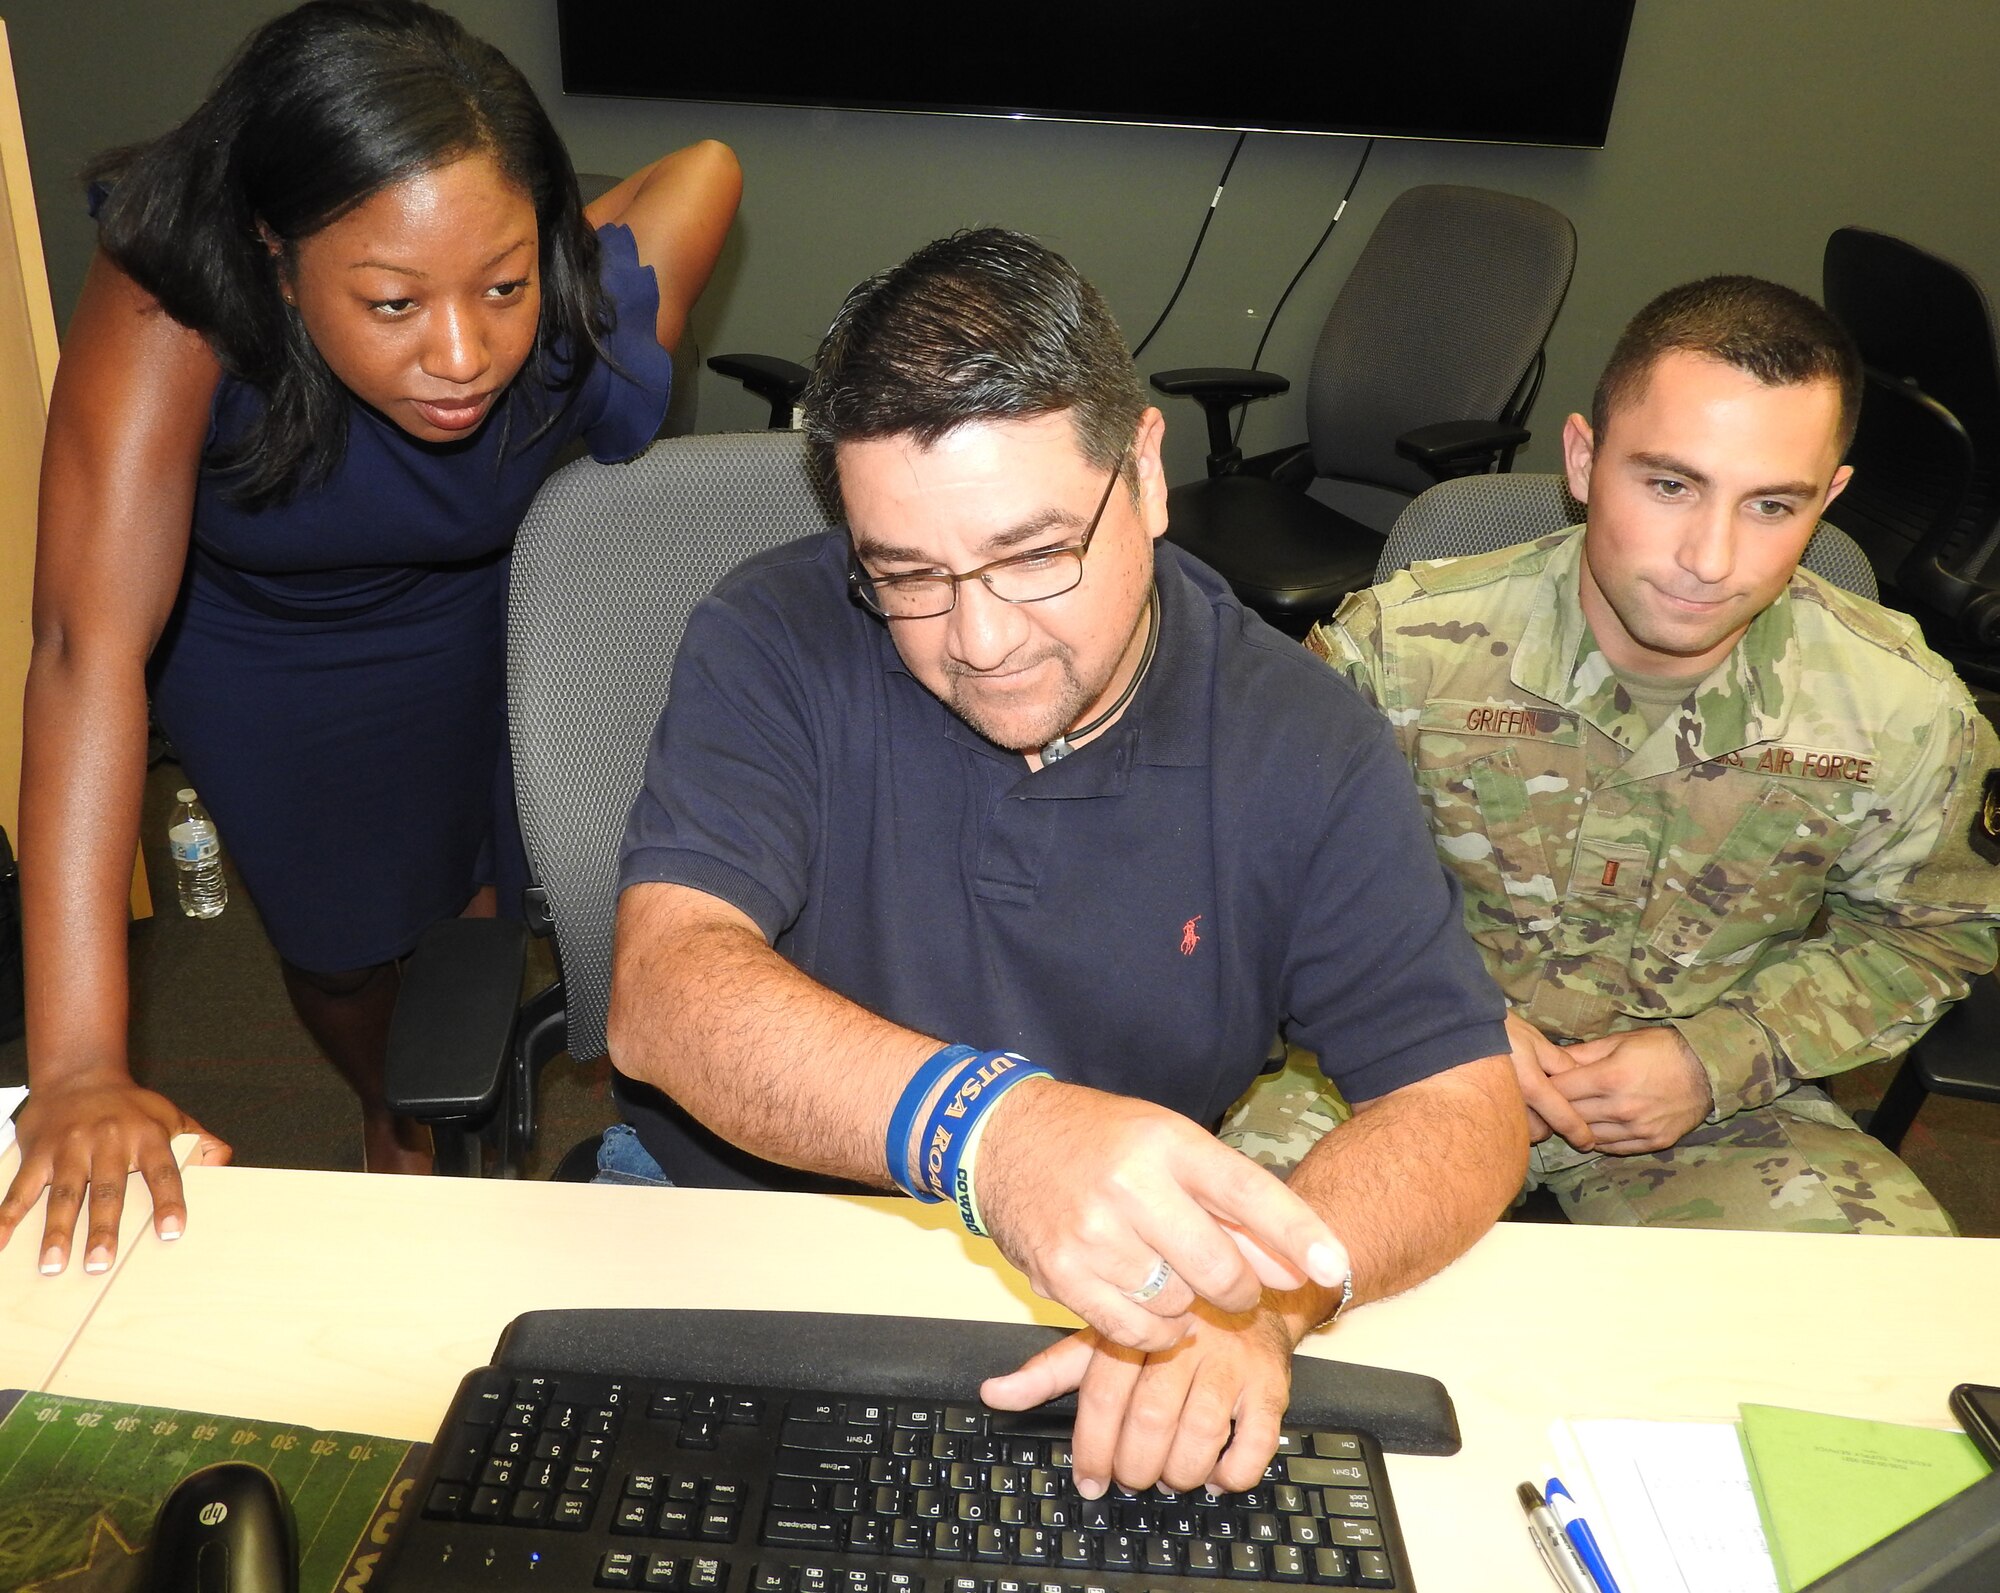 As 30 budget analysts and financial experts gathered at AFIMSC headquarters to close out the fiscal year, 2nd Lt. Paul Griffin and Emerald Lundy, budget officers from Hanscom AFB, Mass., received a behind the scenes look at AFIMSC and end of year operations from Felix Saenz, AFIMSC budget analyst. "This opportunity is powerful," said Chris Underwood, technical director for financial analysis with AFIMSC's budget office. "They are returning to their installation with more tools in their toolbox than when they arrived." (Air Force photo by Ed Shannon)